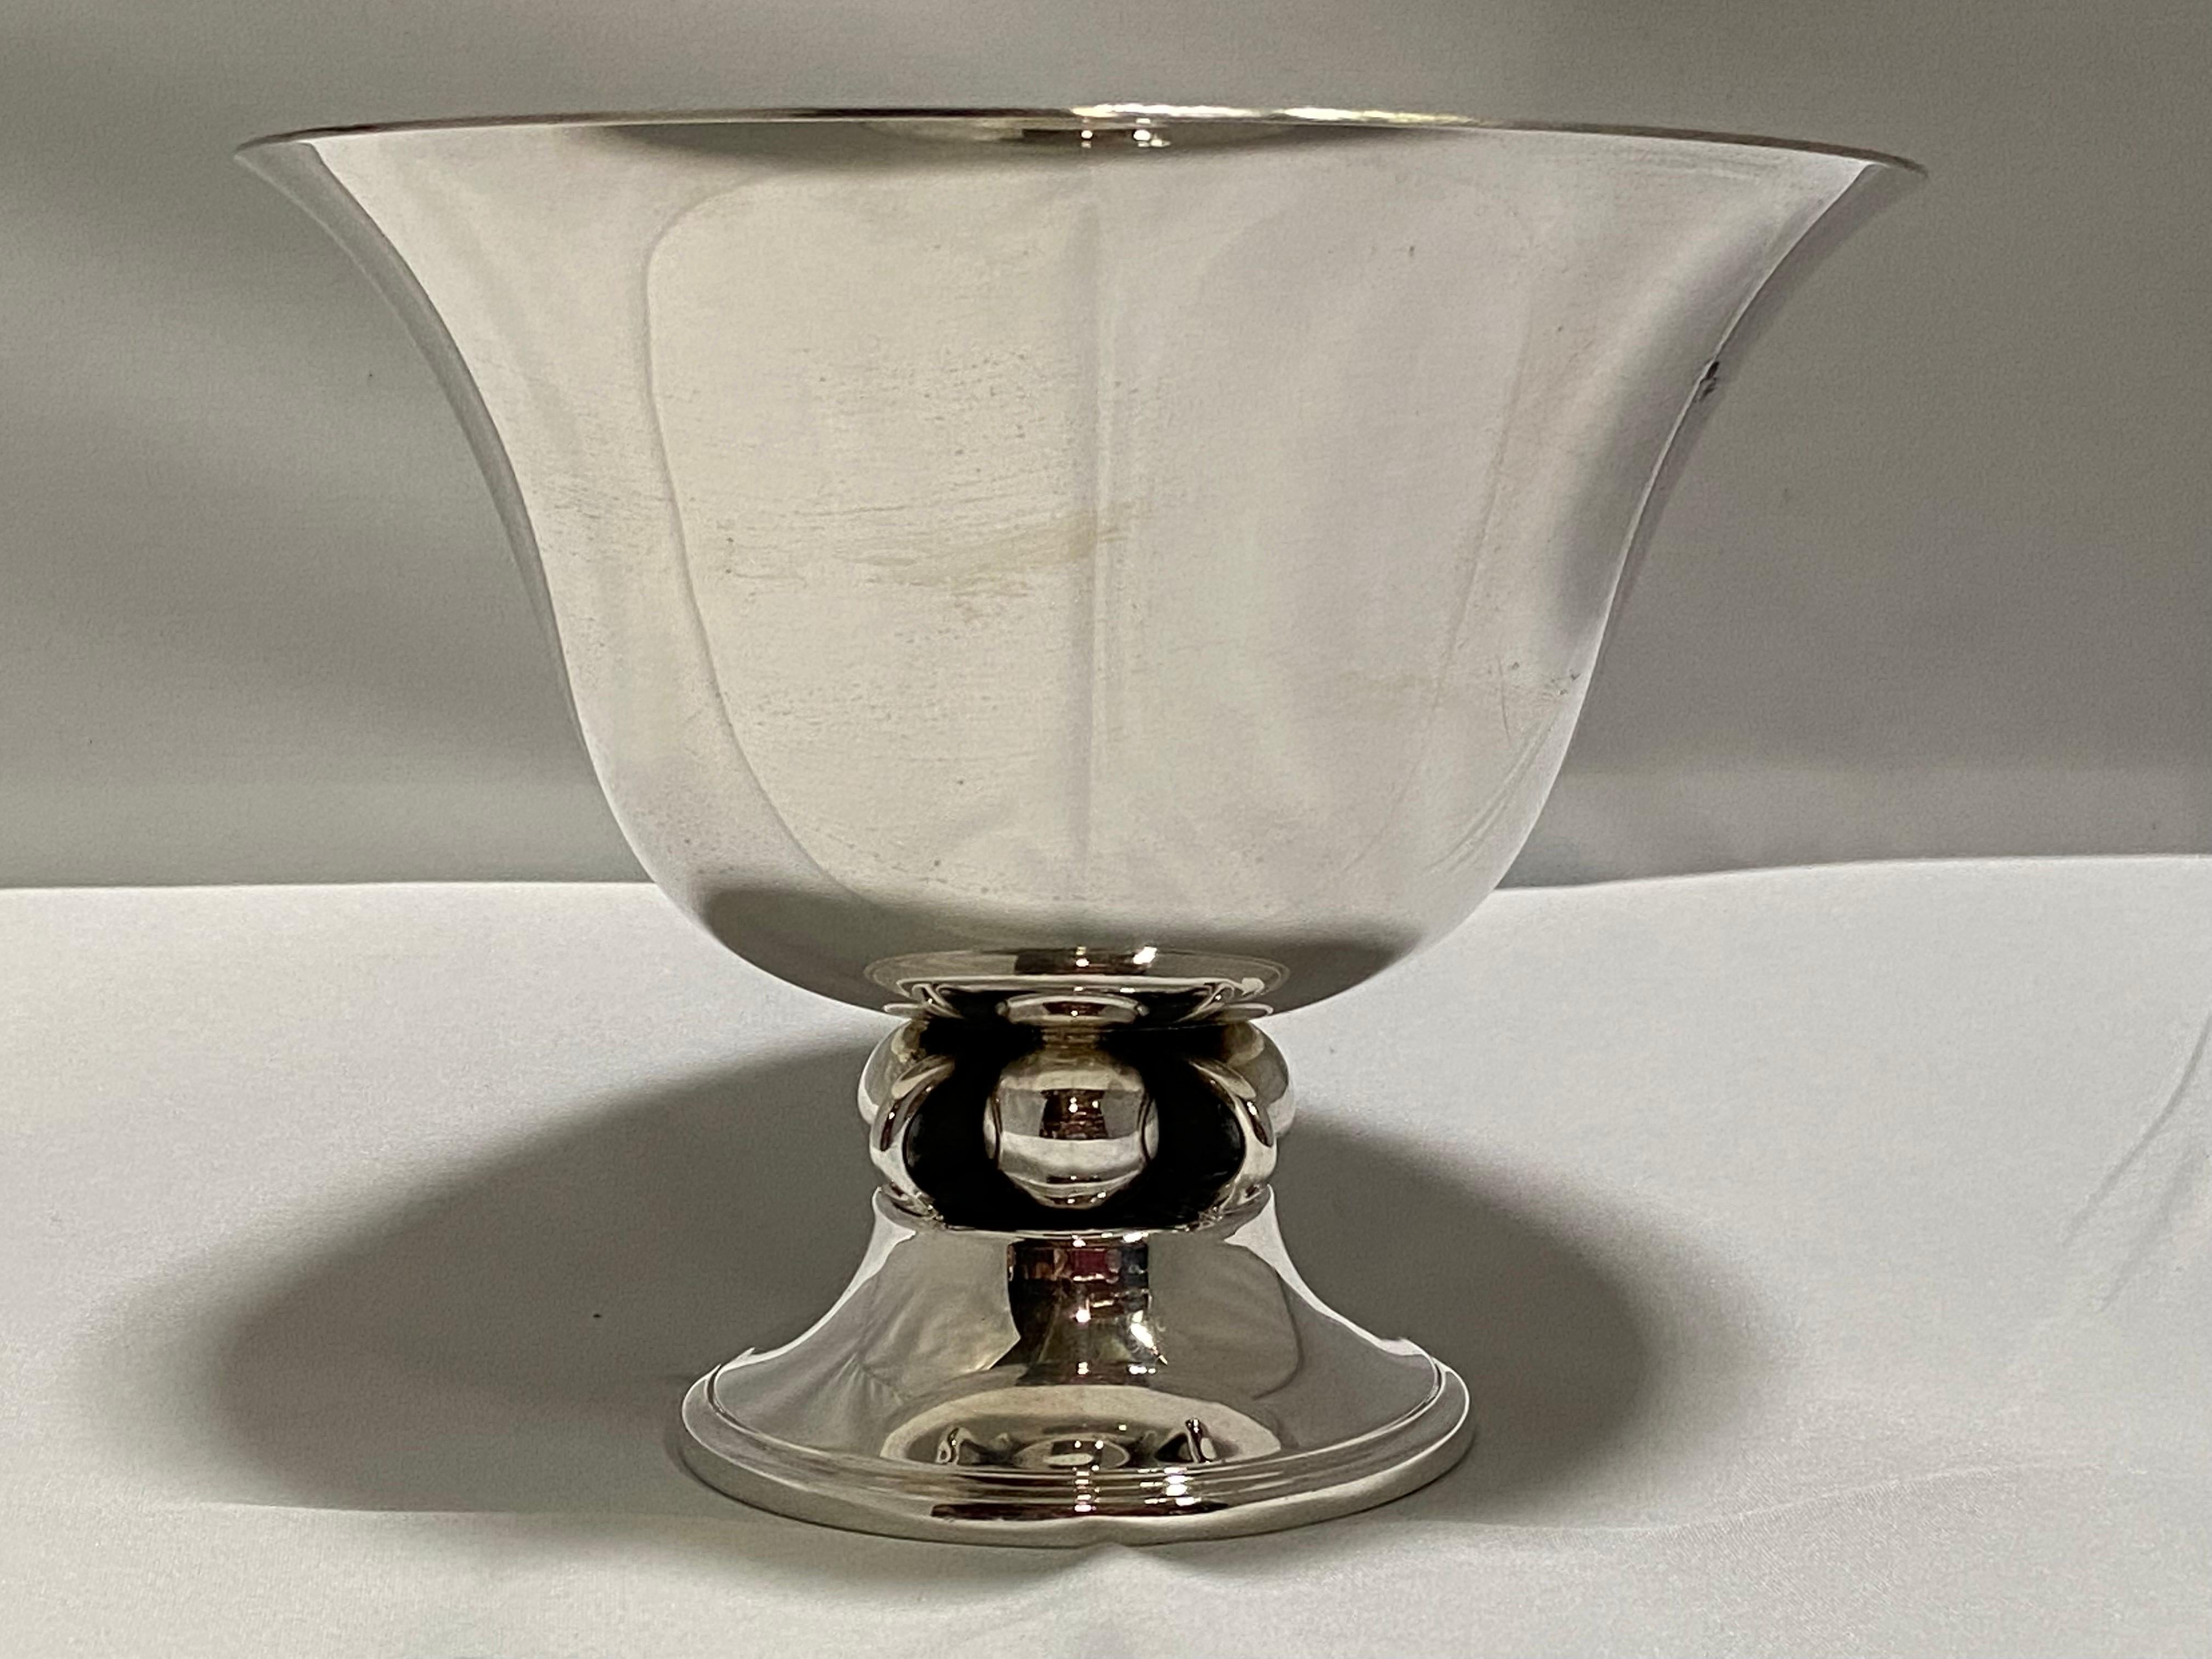 An elegant mid 20th century sterling silver footed bowl or compote by the Durham Silver Company of New York. Durham was active in the mid 20th century, 1950's and 1960's. The design of this bowl reminds the viewer of the works by Alphone La Paglia,